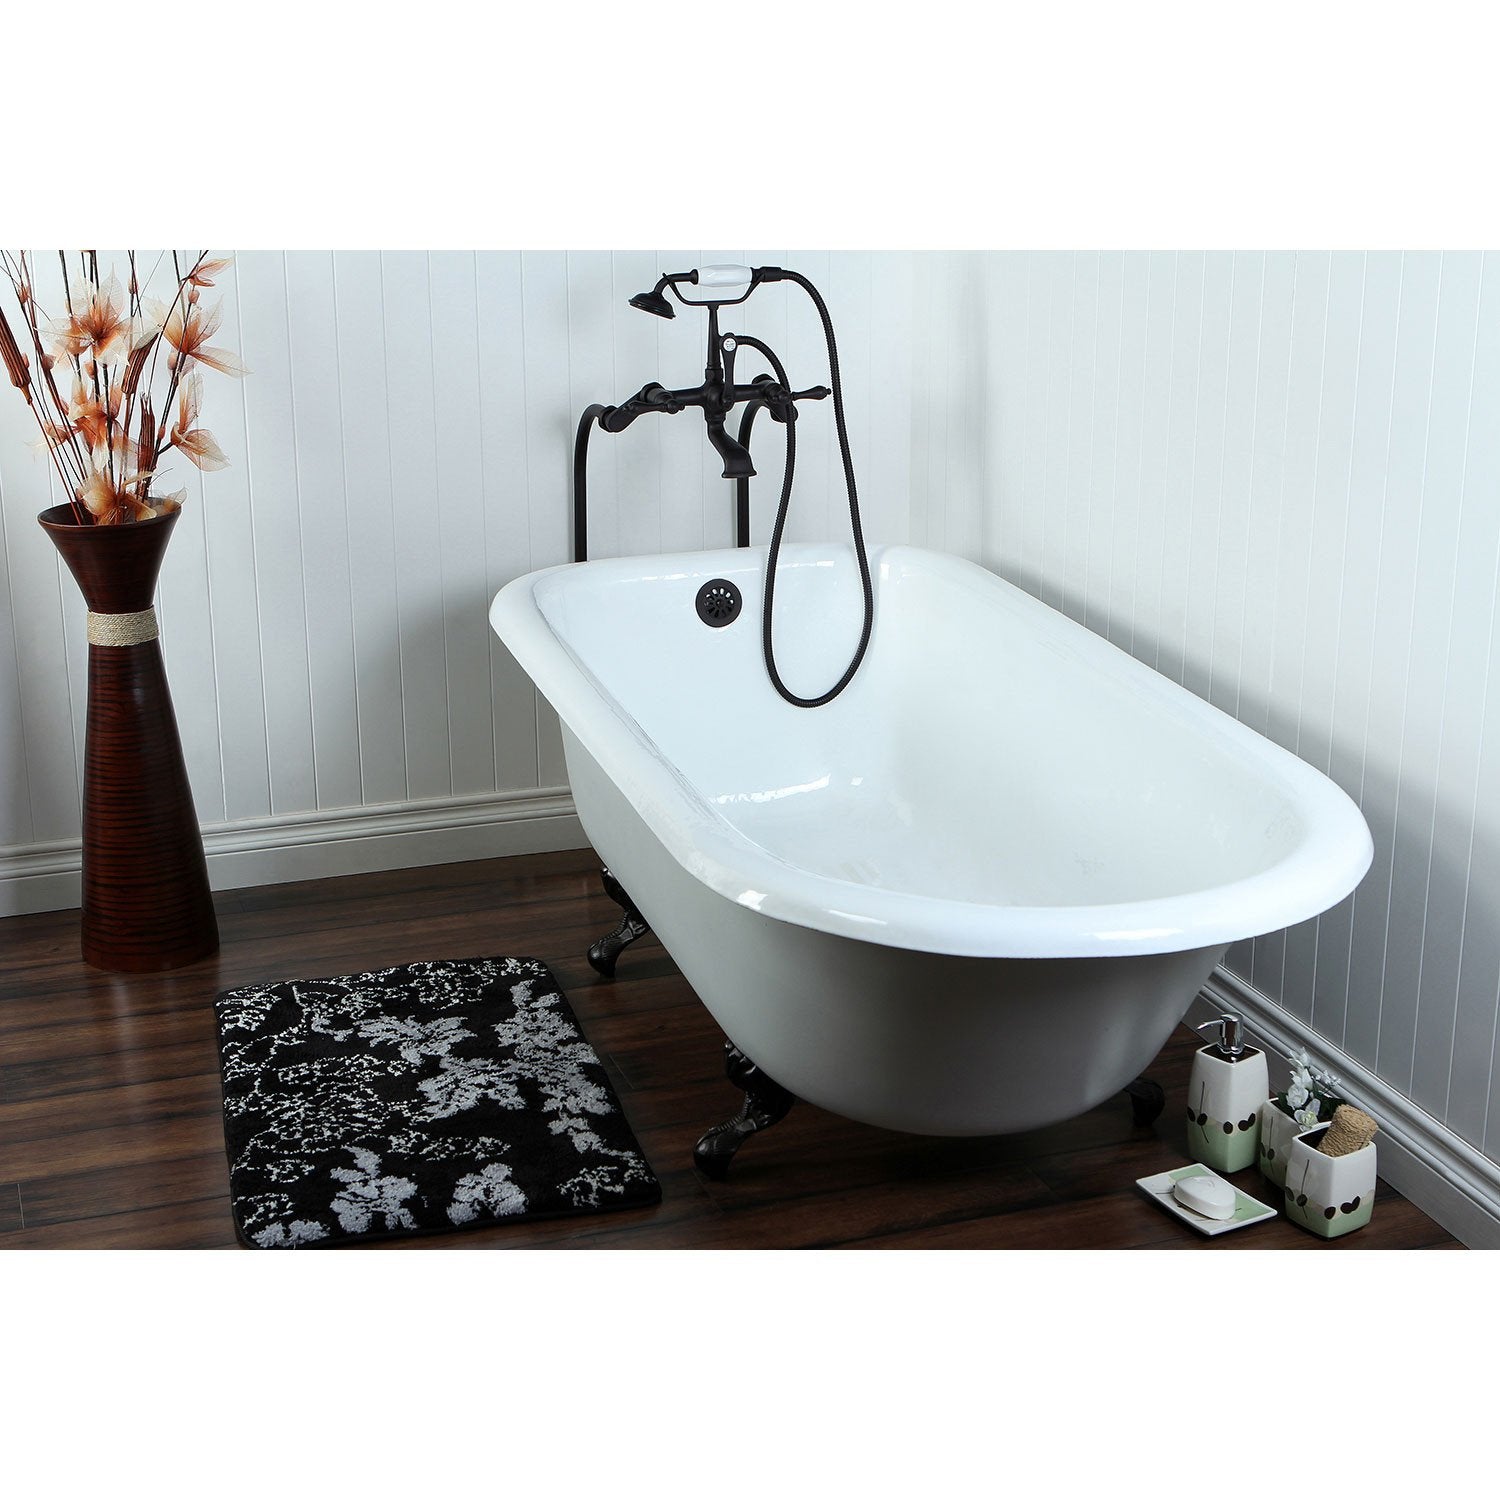 67 Clawfoot Tub W Floor Mount Oil Rubbed Bronze Tub Filler Faucet